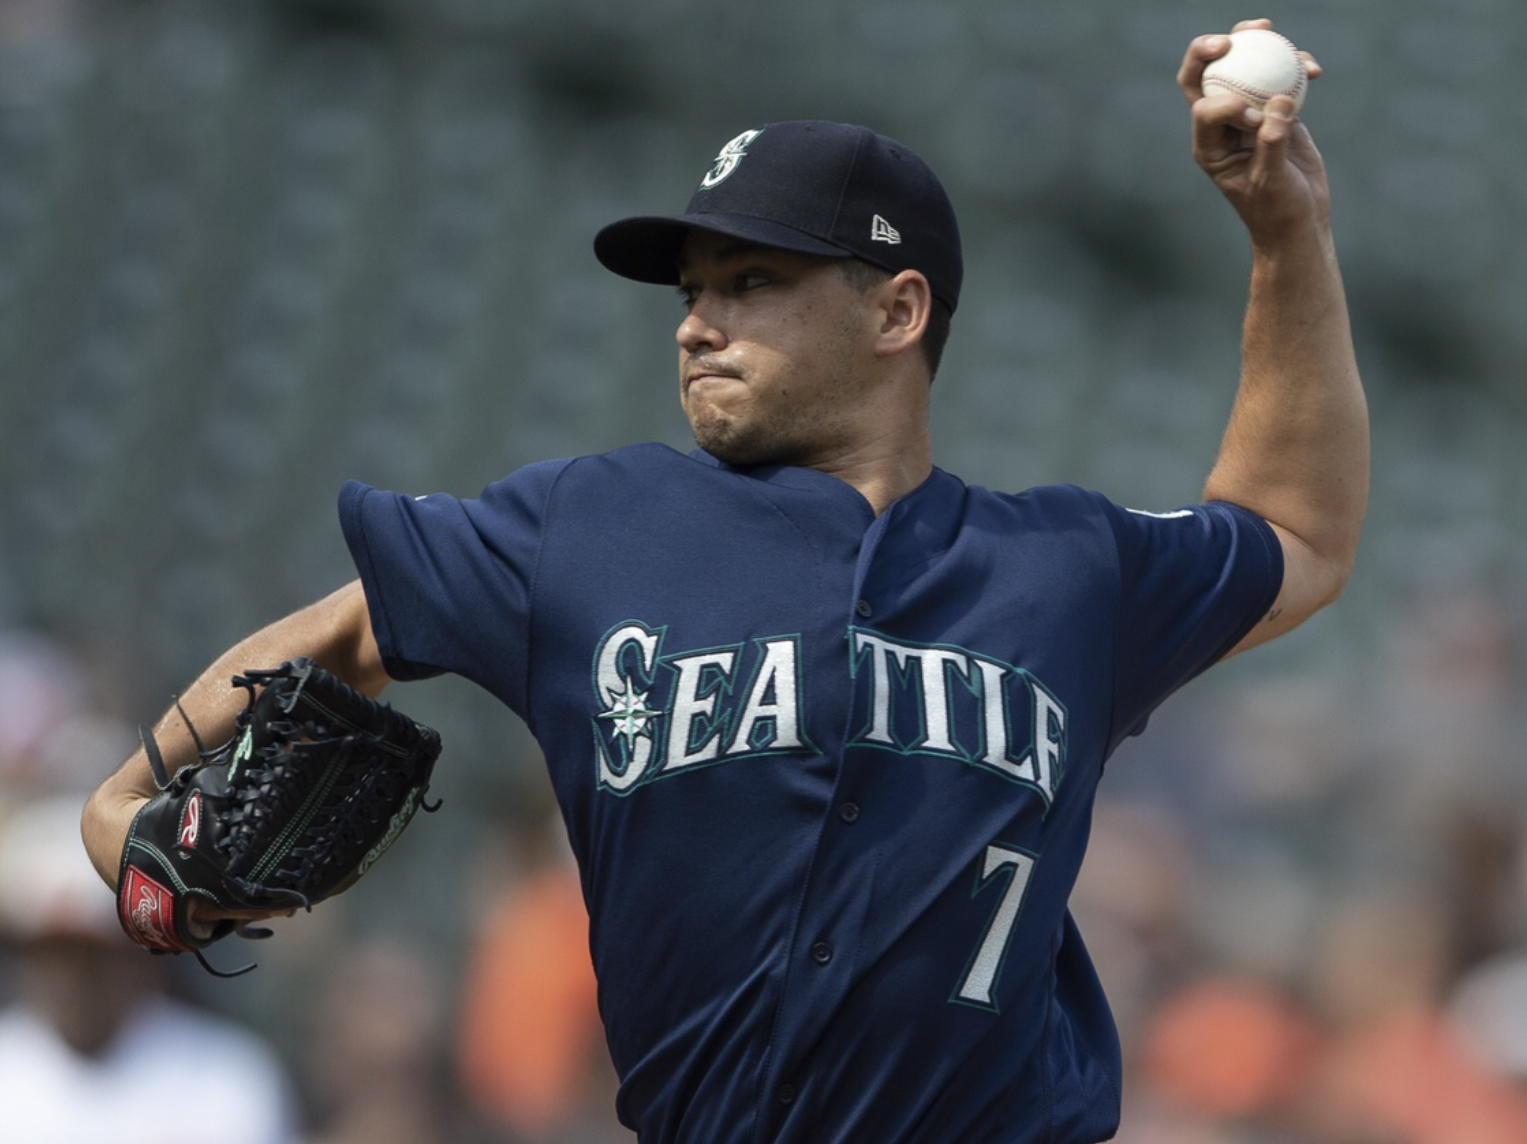 Report: Mariners sign ace Marco Gonzales to four-year, $30 million extension